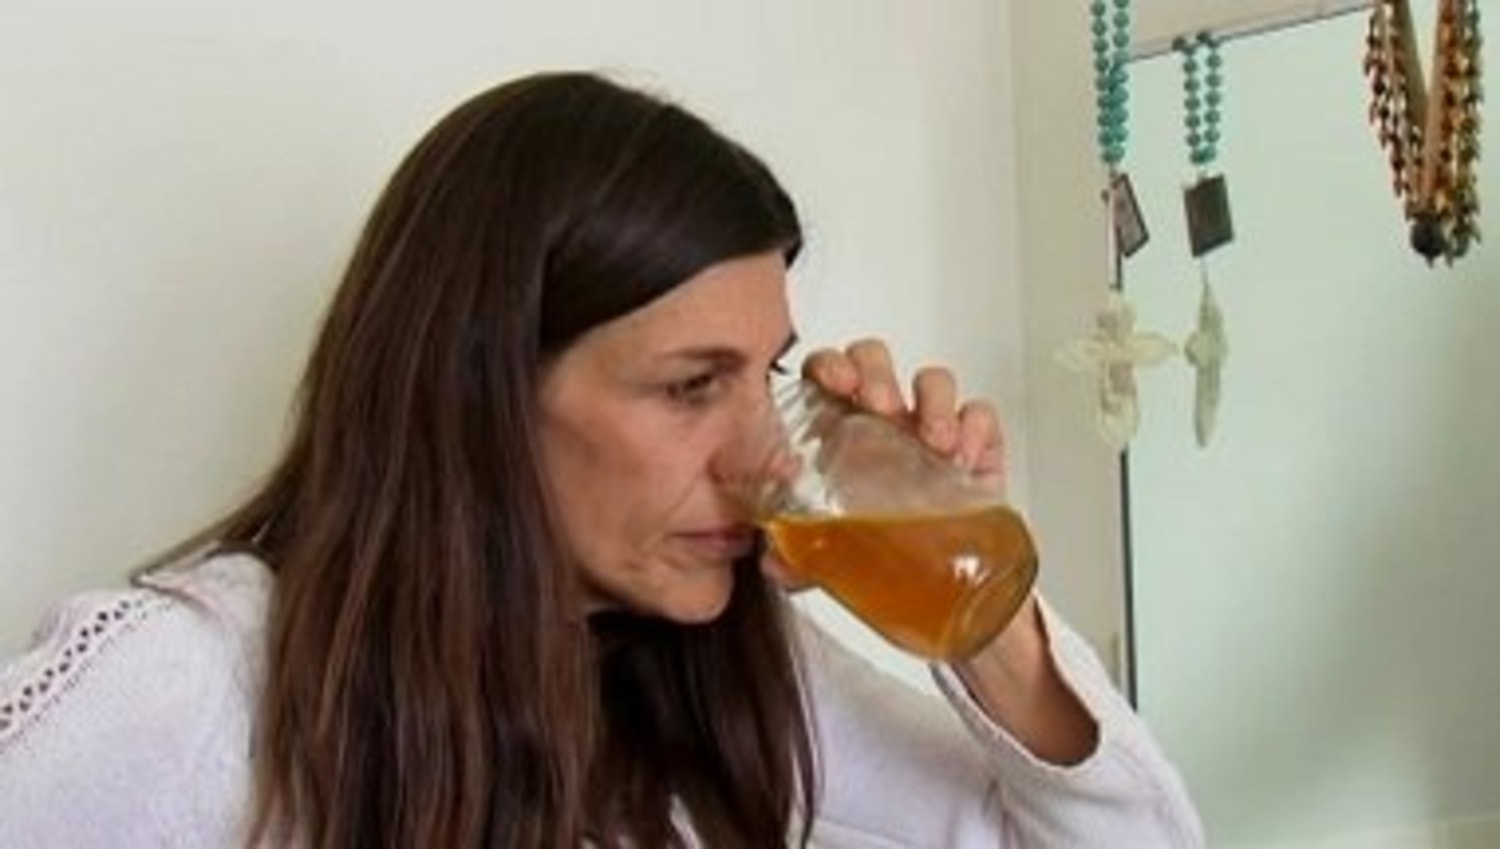 Woman drinks and bathes in her own urine on My Strange Addiction pic